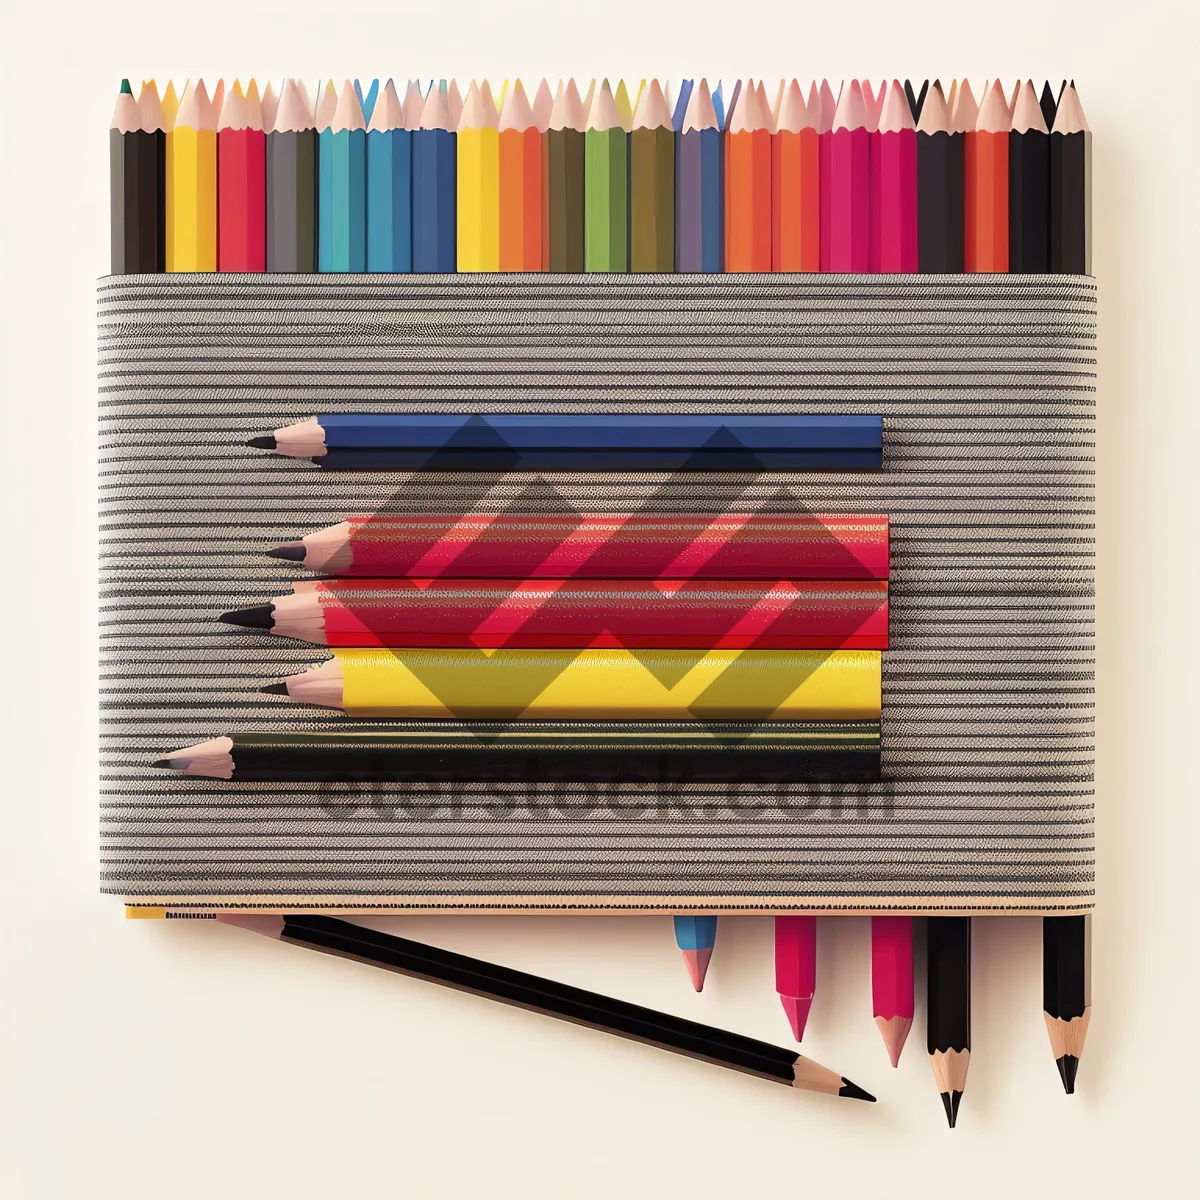 Picture of Vibrant Rainbow Pencil Box: A Burst of Colorful Creativity